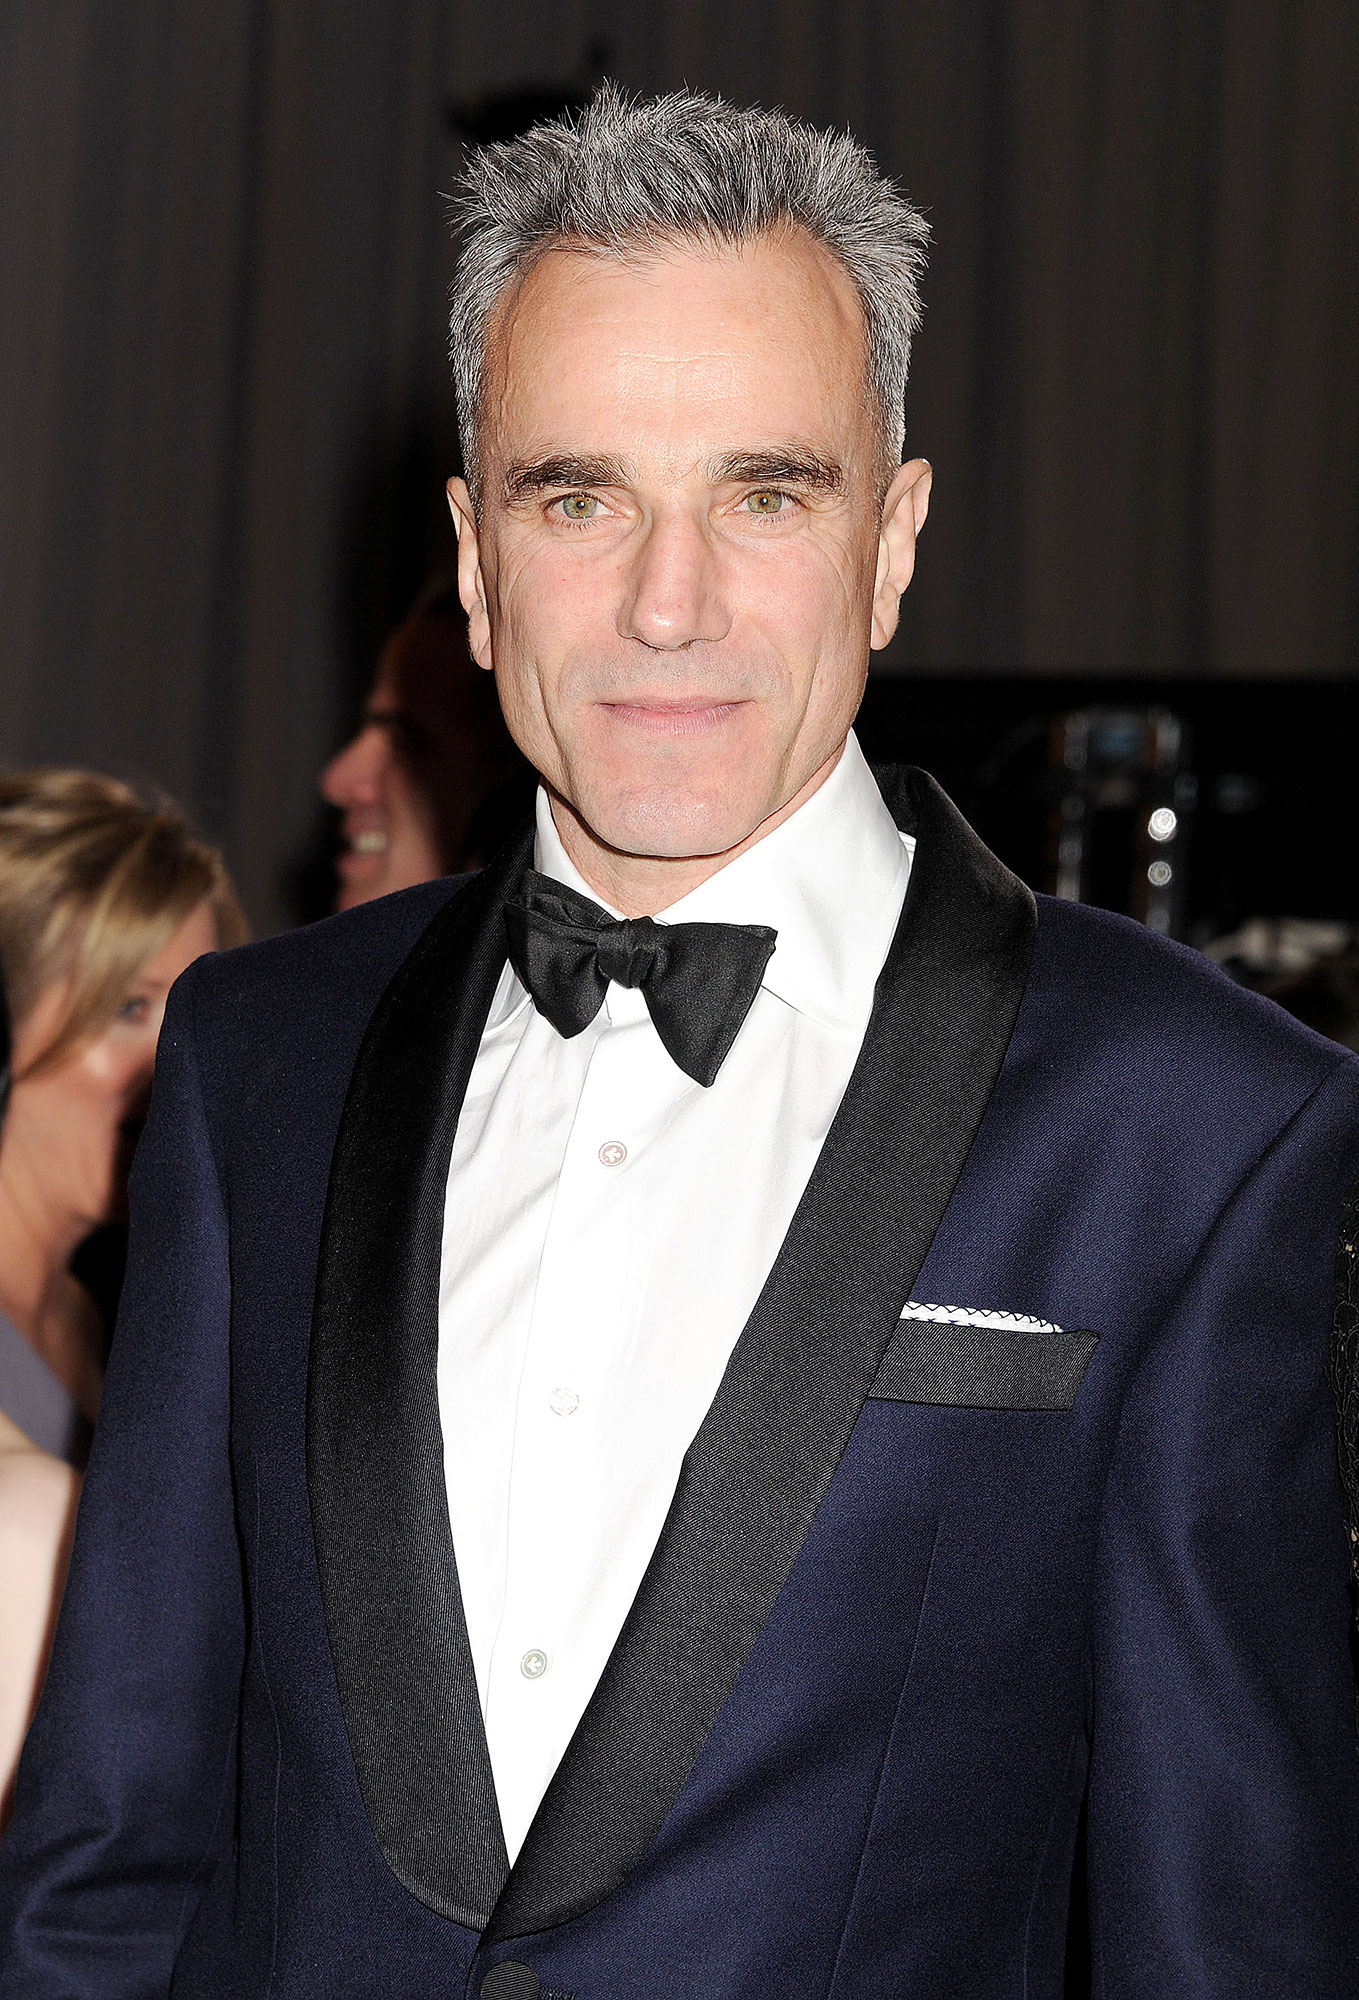 Daniel Day-Lewis Celebs Who Have Been Knighted By the British Monarchy